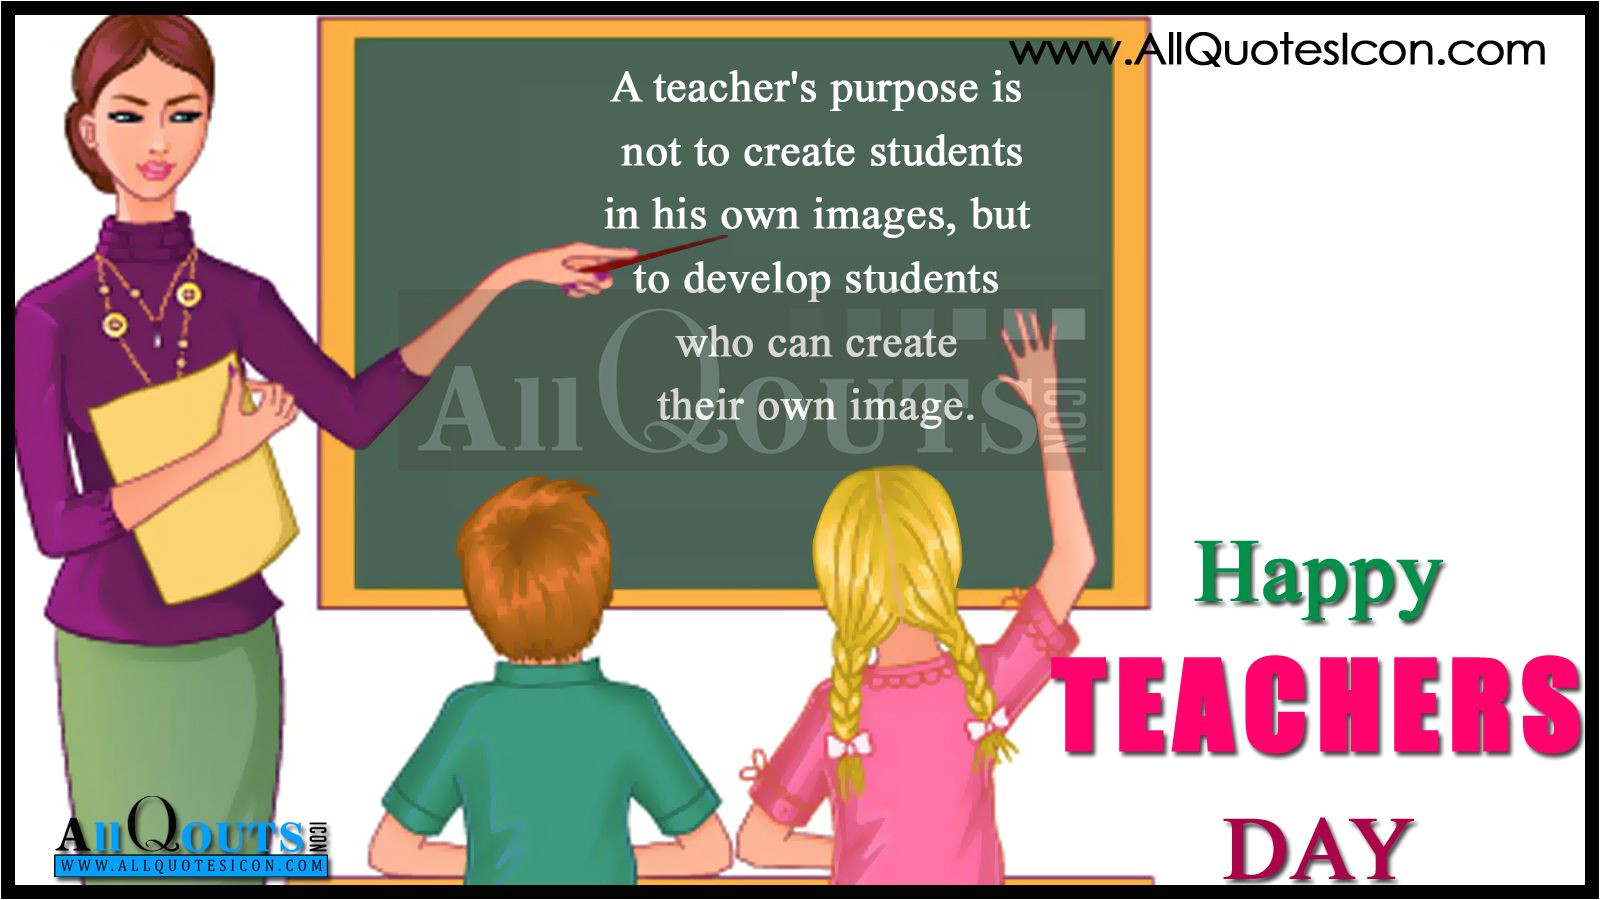 Teachers Day Card Very Nice 33 Teacher Day Messages to Honor Our Teachers From Students